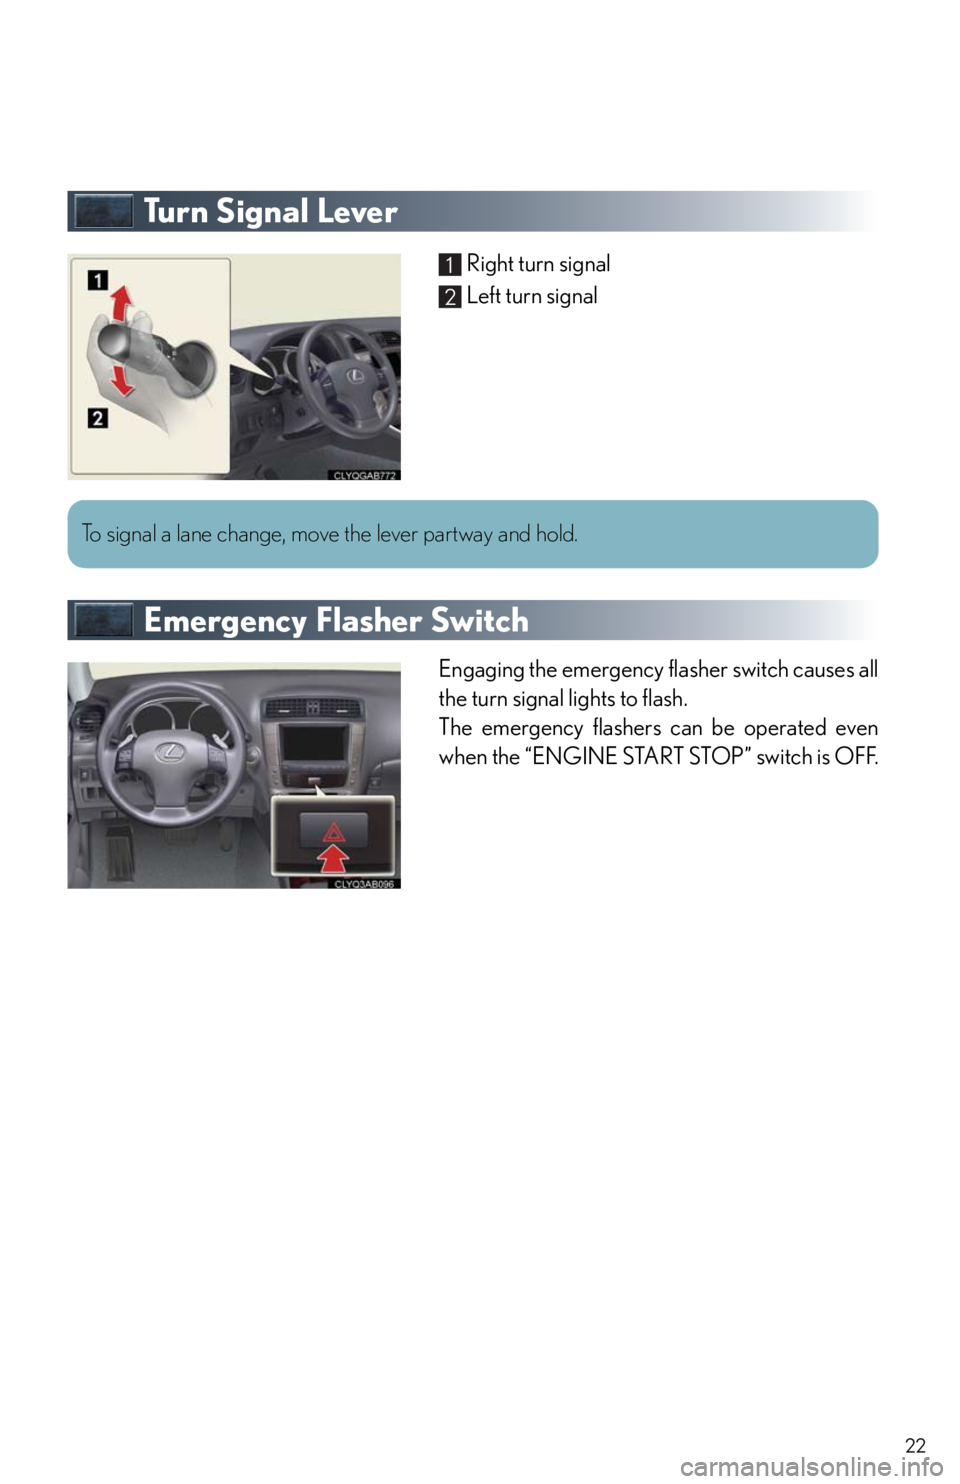 Lexus IS250 2010  Using The Air Conditioning System And Defogger / LEXUS 2010 IS350/250 QUICK GUIDE OWNERS MANUAL (OM53812U) 22
Tu r n  S i g n a l  L e v e r
Right turn signal
Left turn signal
Emergency Flasher Switch
Engaging the emergency flasher switch causes all
the turn signal lights to flash.
The emergency flashers c